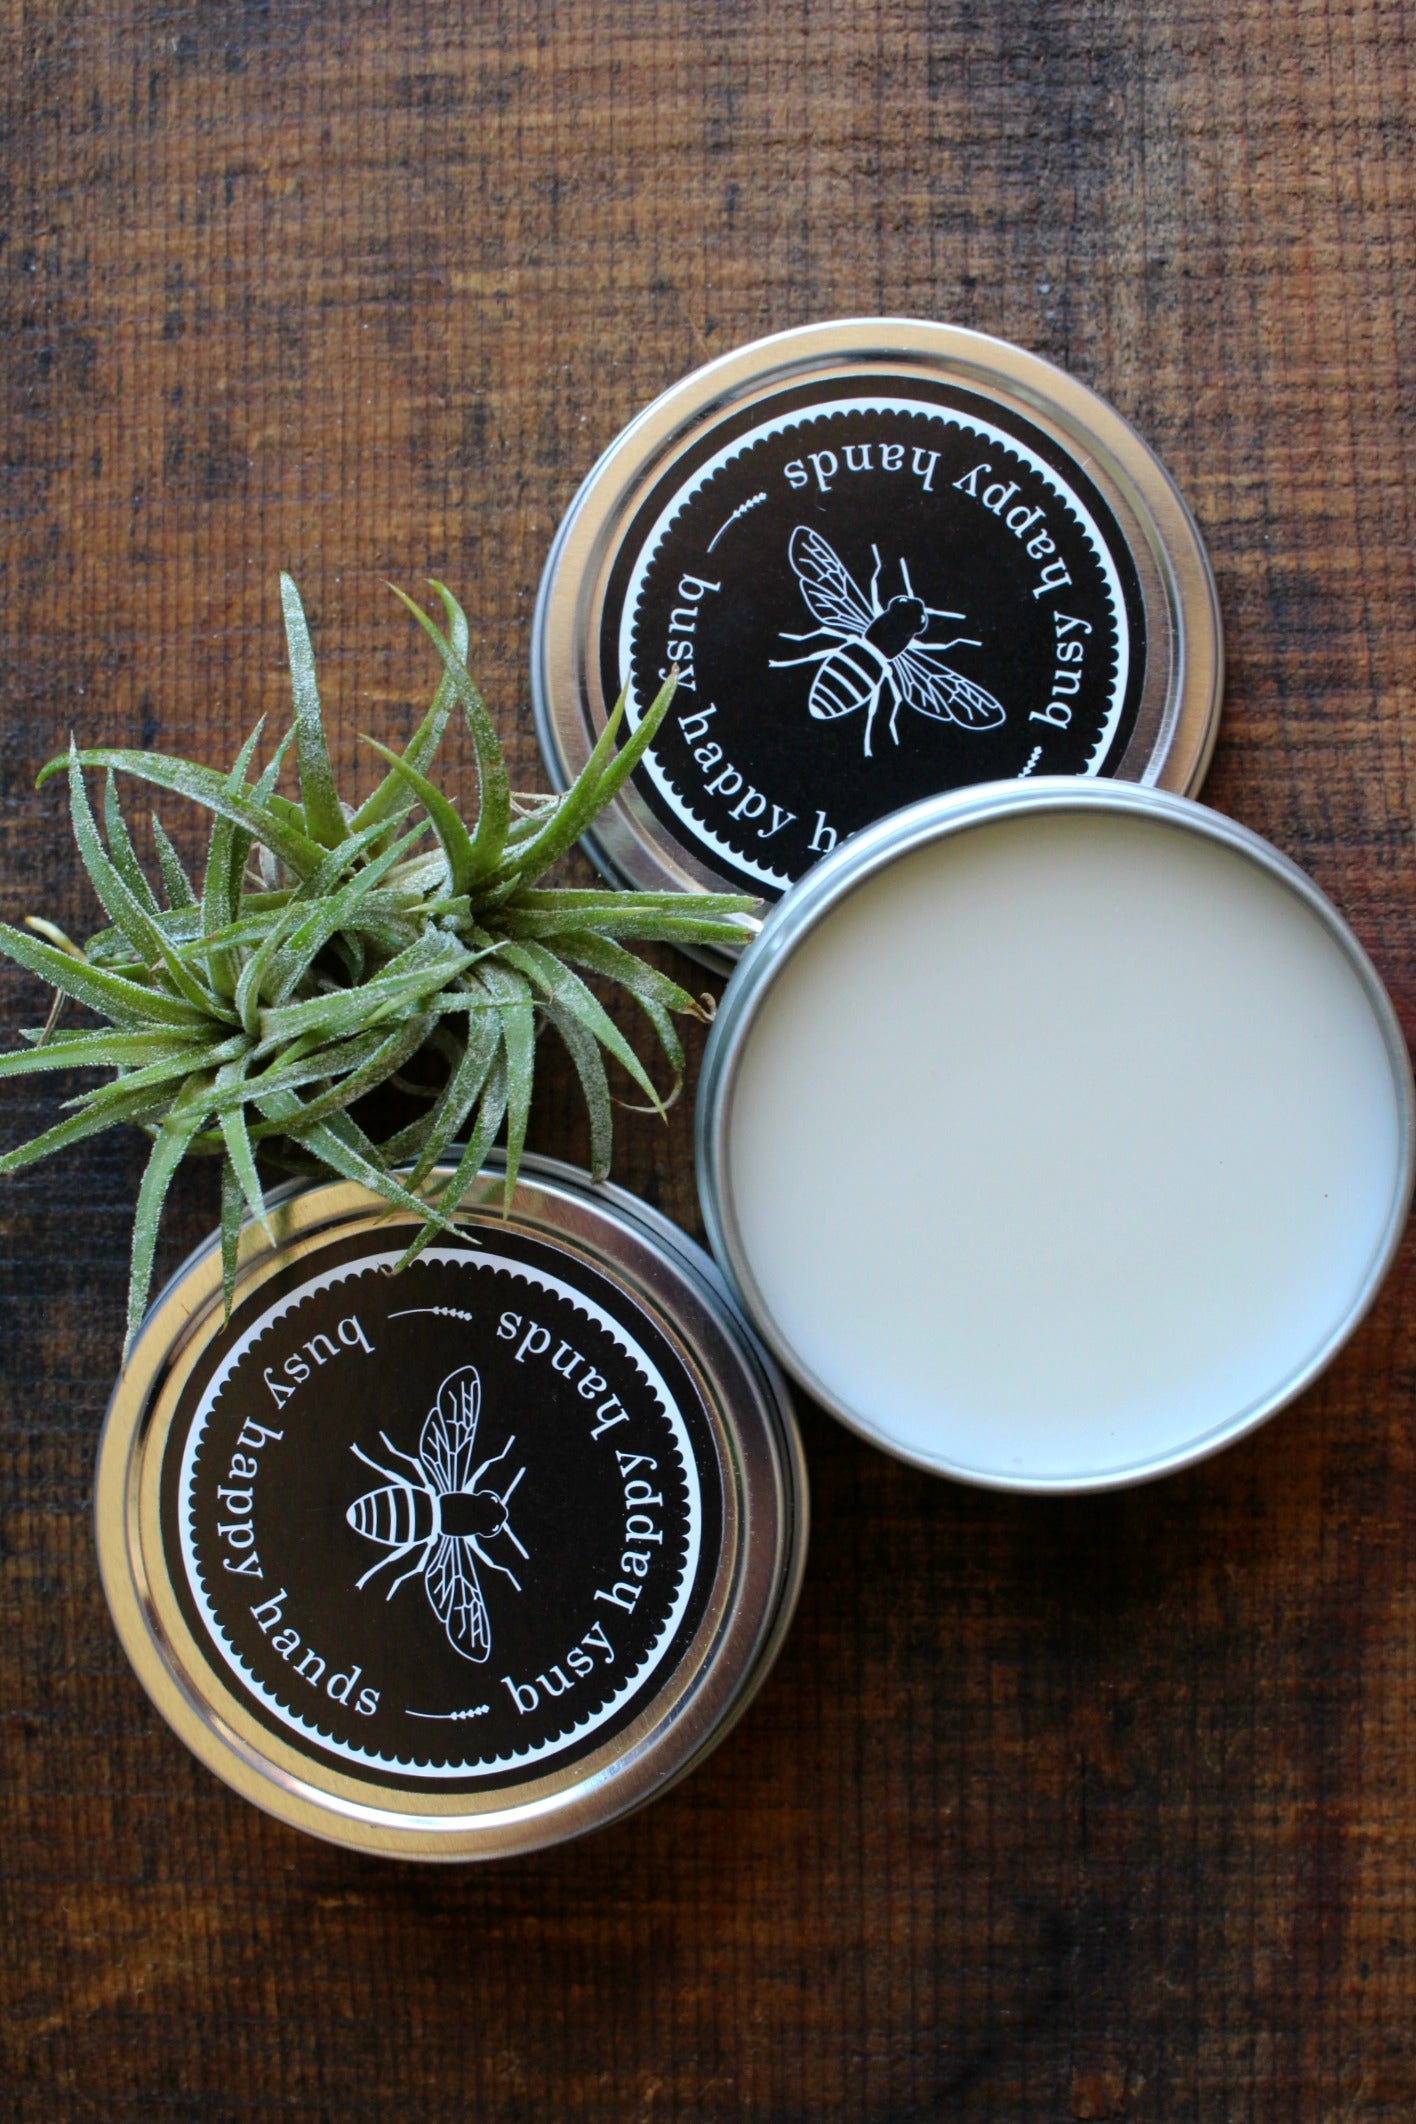 Busy Happy Hands - Natural Healing Salve